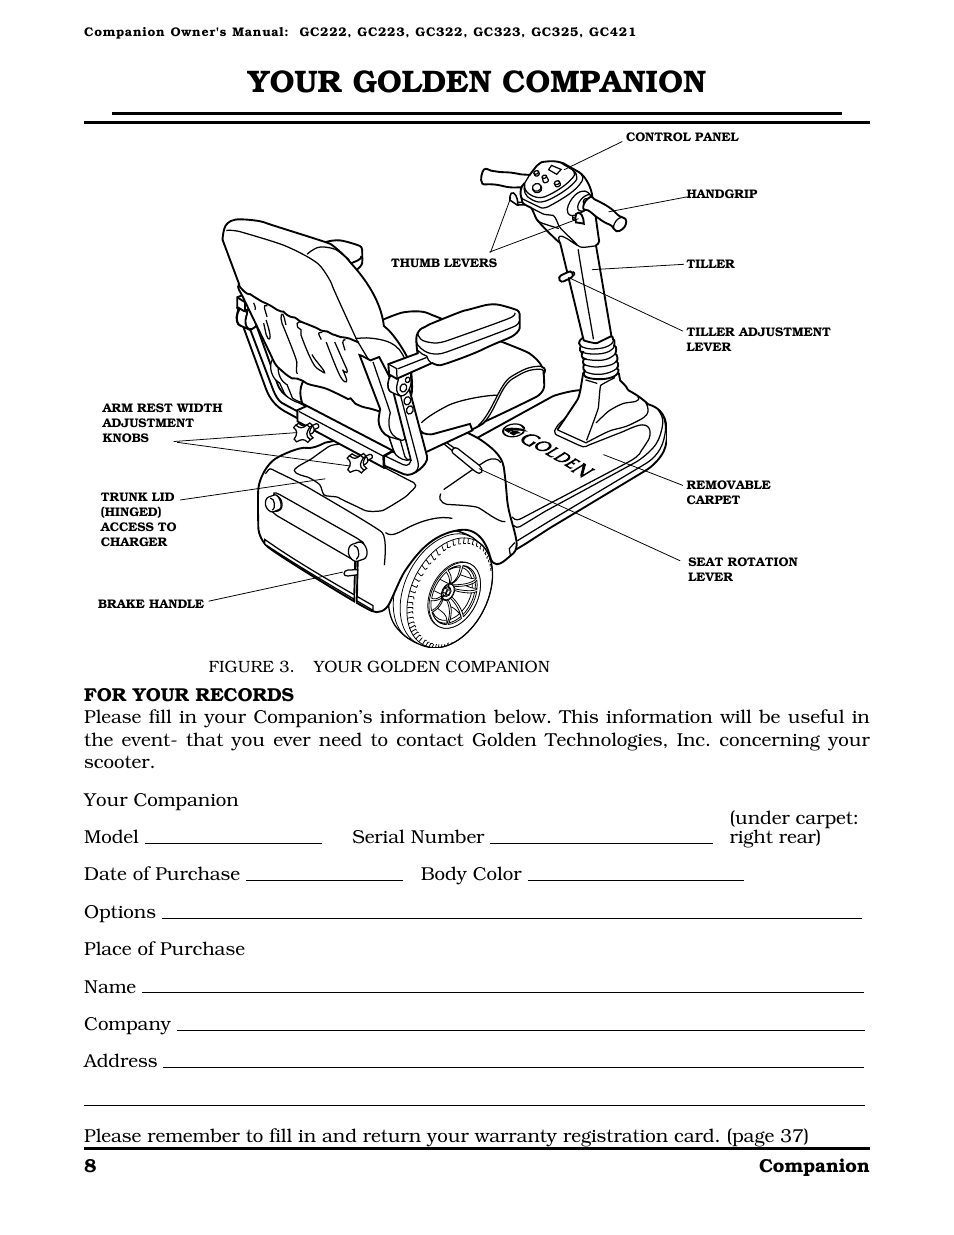 Your golden companion | Golden Technologies Companion II User Manual | Page 10 / 41